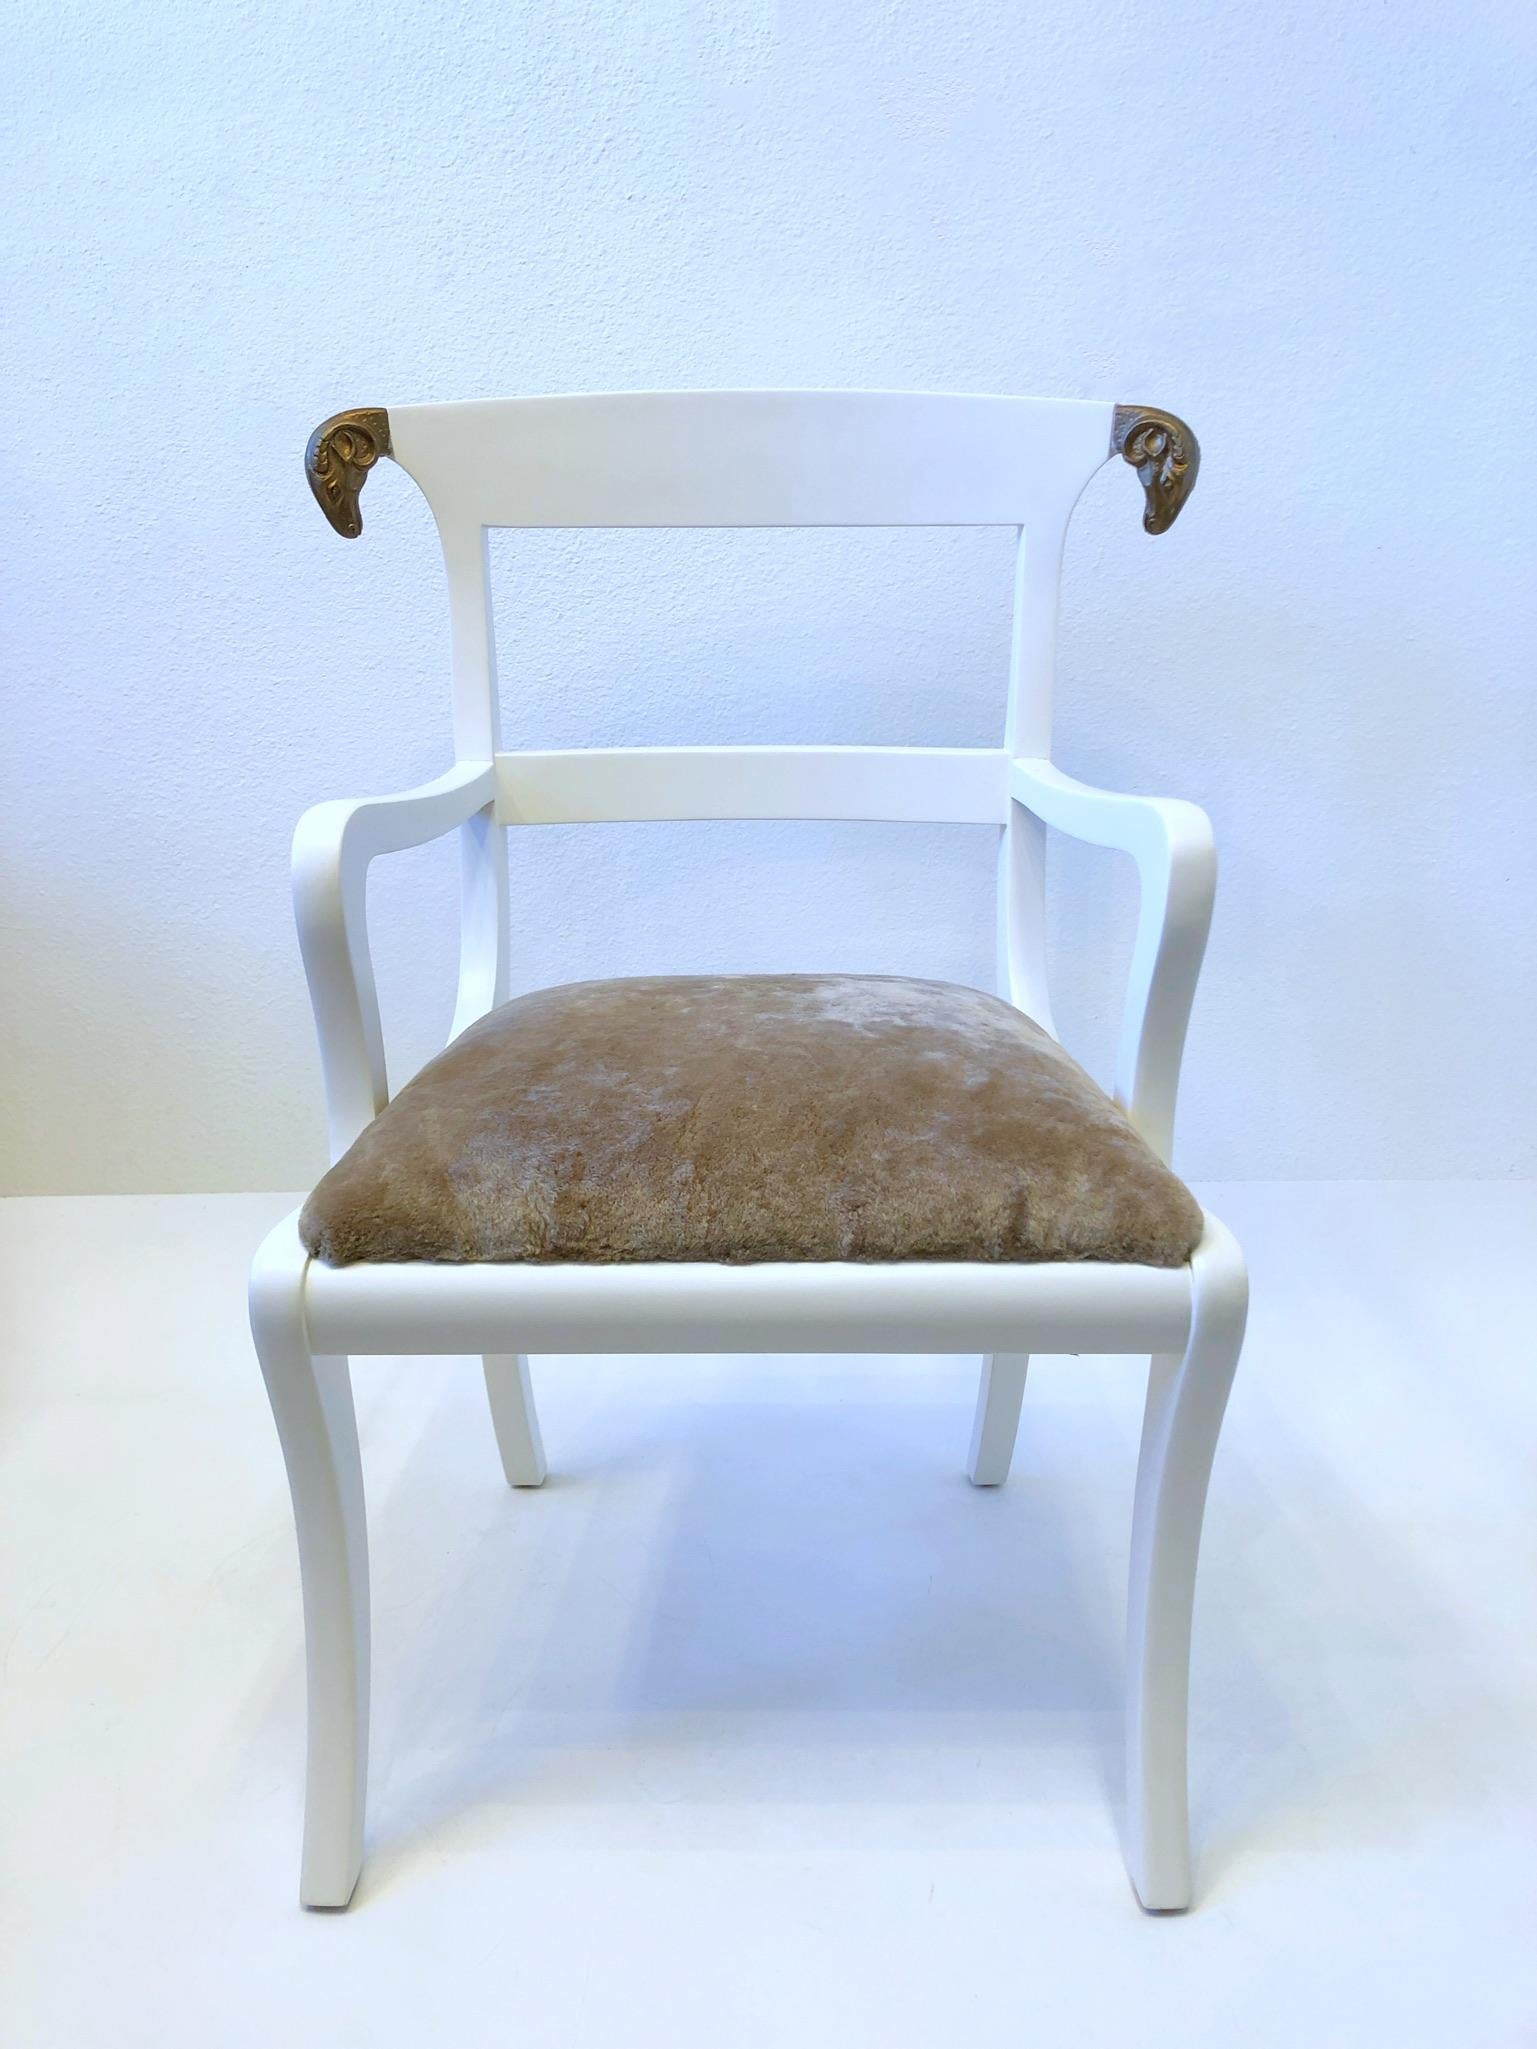 1980’s white lacquered armchair with gold rams head details, designed by Colombian designer Enrique Garcel. 
The seat is newly recovered with a soft lite mocha shearling.
Measurements: 28” Wide, 23.25” Deep, 36.75” High, 20” Seat, 26” Arm.